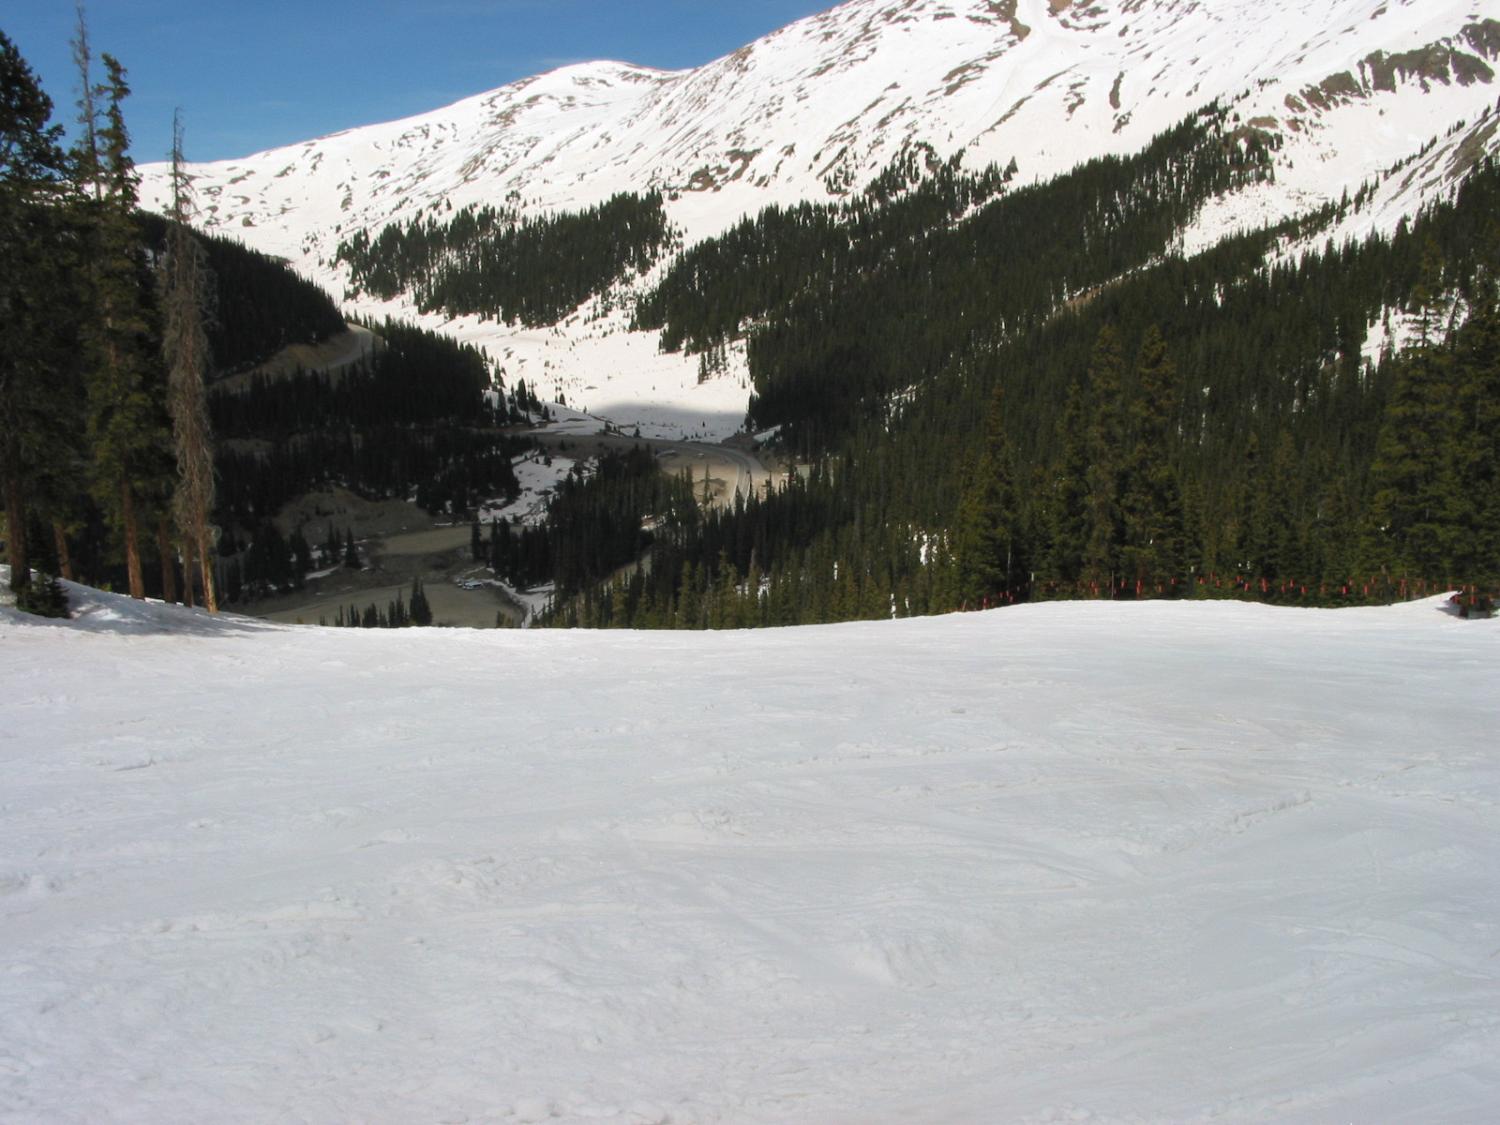 The High Noon Ski Run is a wide intermediate ski run that's generally groomed frequently.